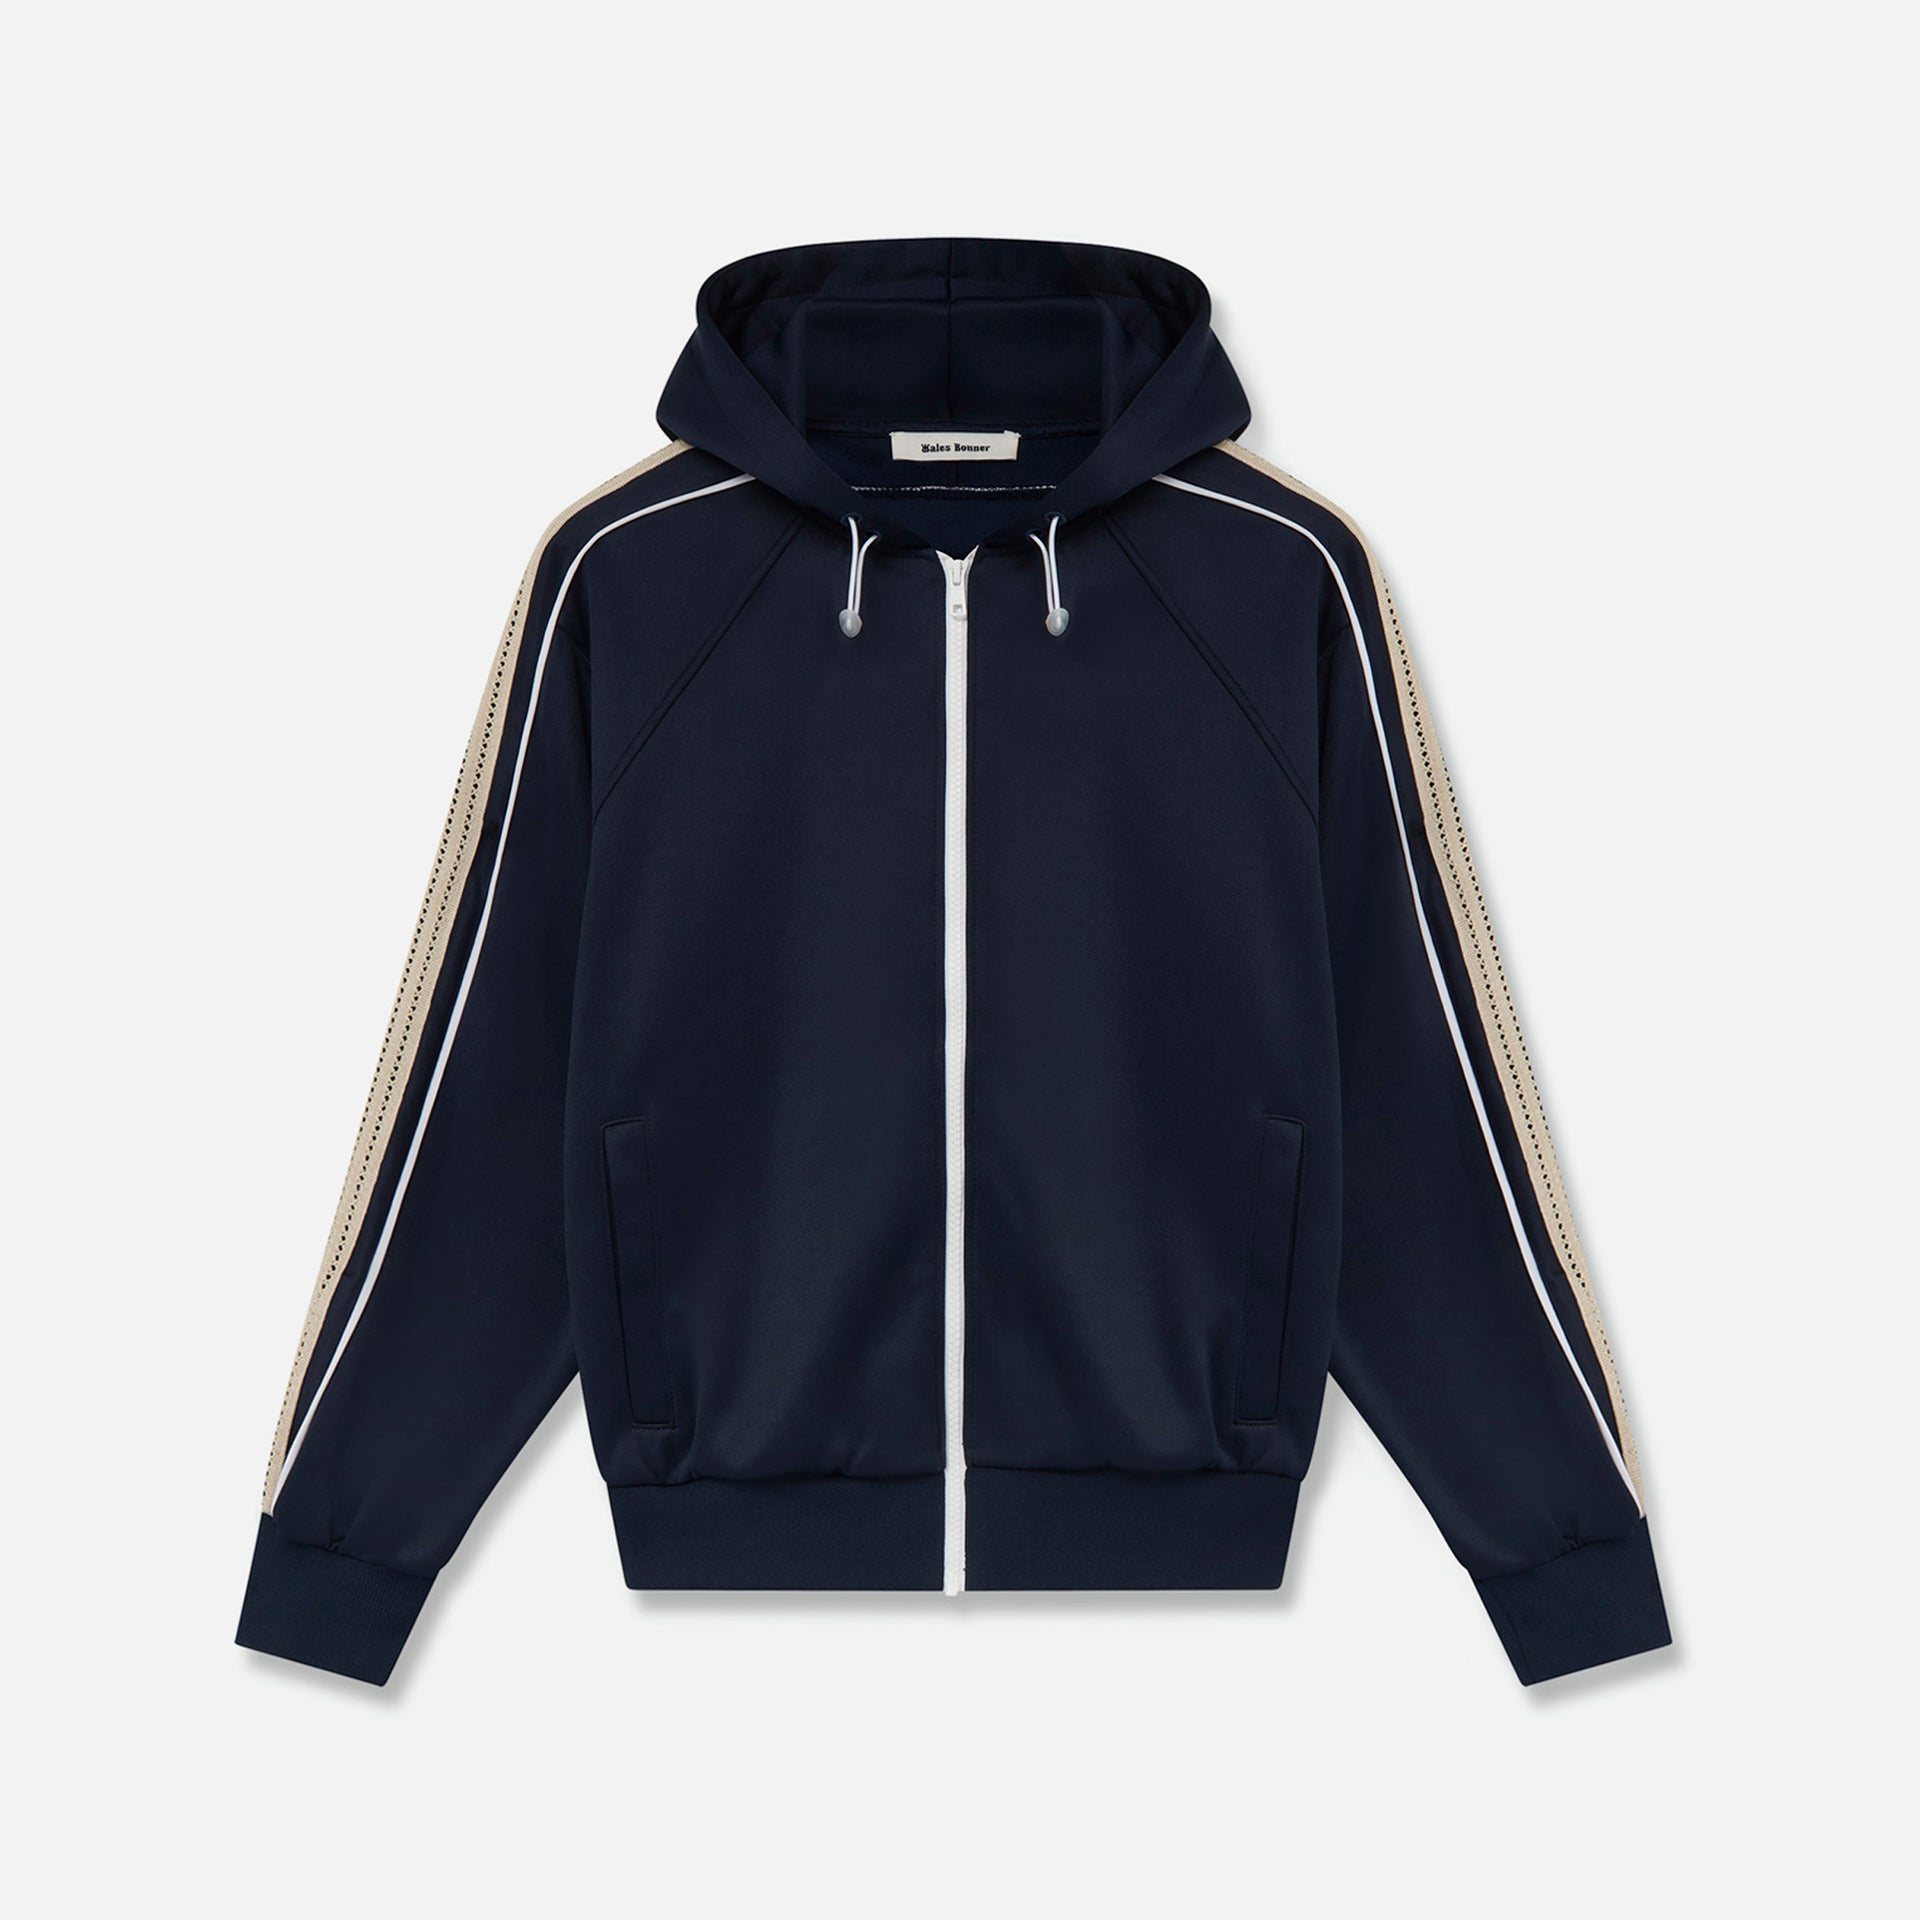 Wales Bonner Mantra Front Hoodie - Navy